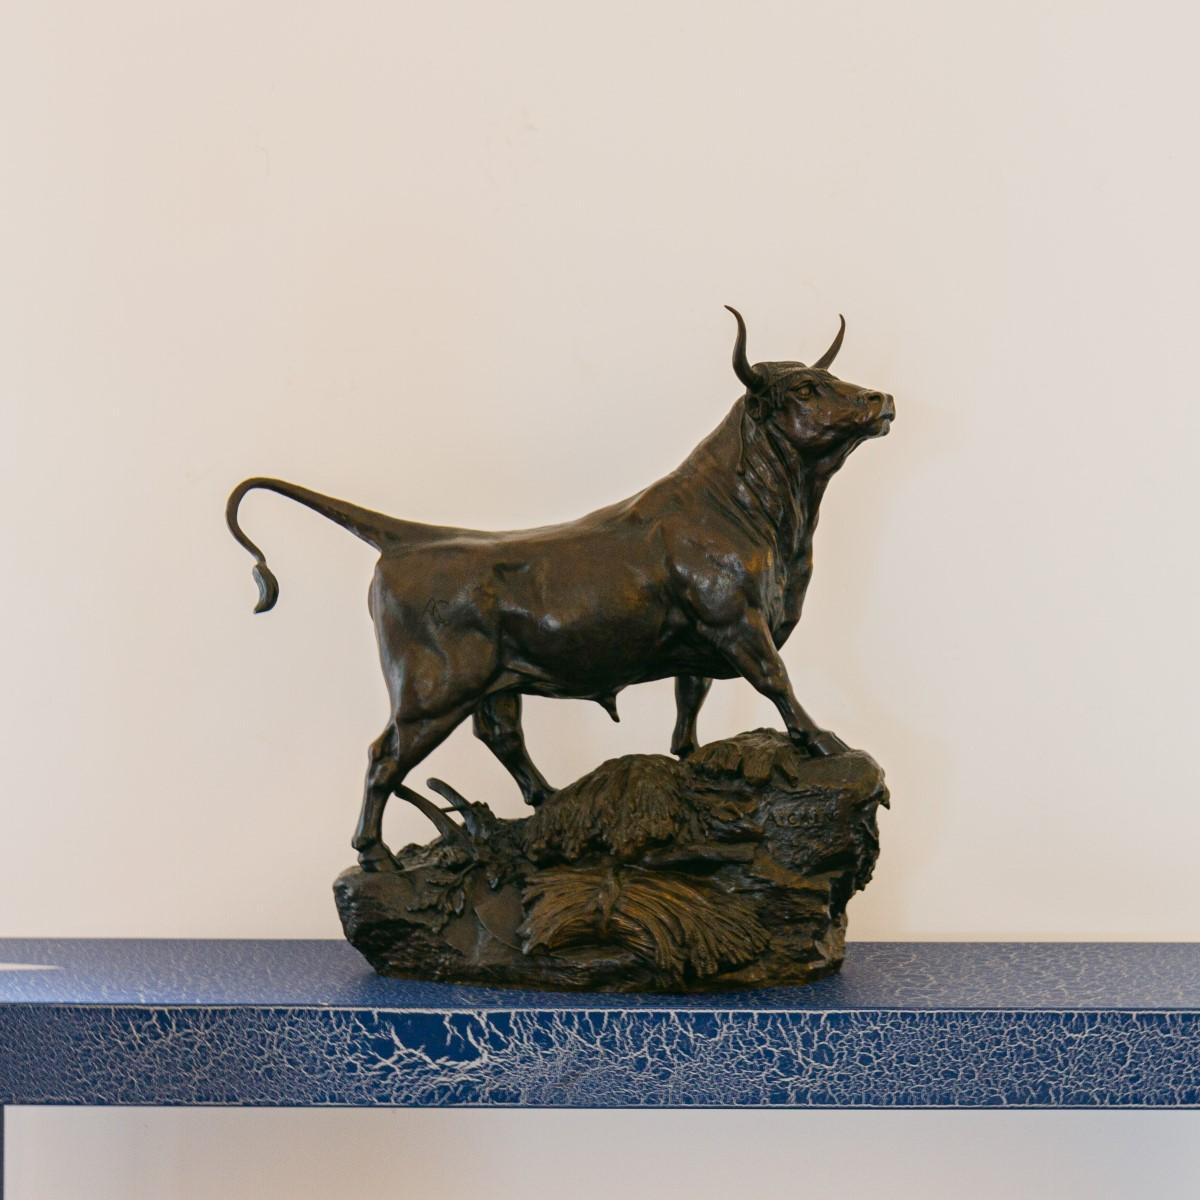 A late 19th century French patinated bronze model of a bull standing amongst an overturned wheat cart, on a rocky outcrop by Auguste Nicolas Cain. 

The bull has been branded with the sculptors initials 'AC' and also signed 'A. Cain' to the rocks.